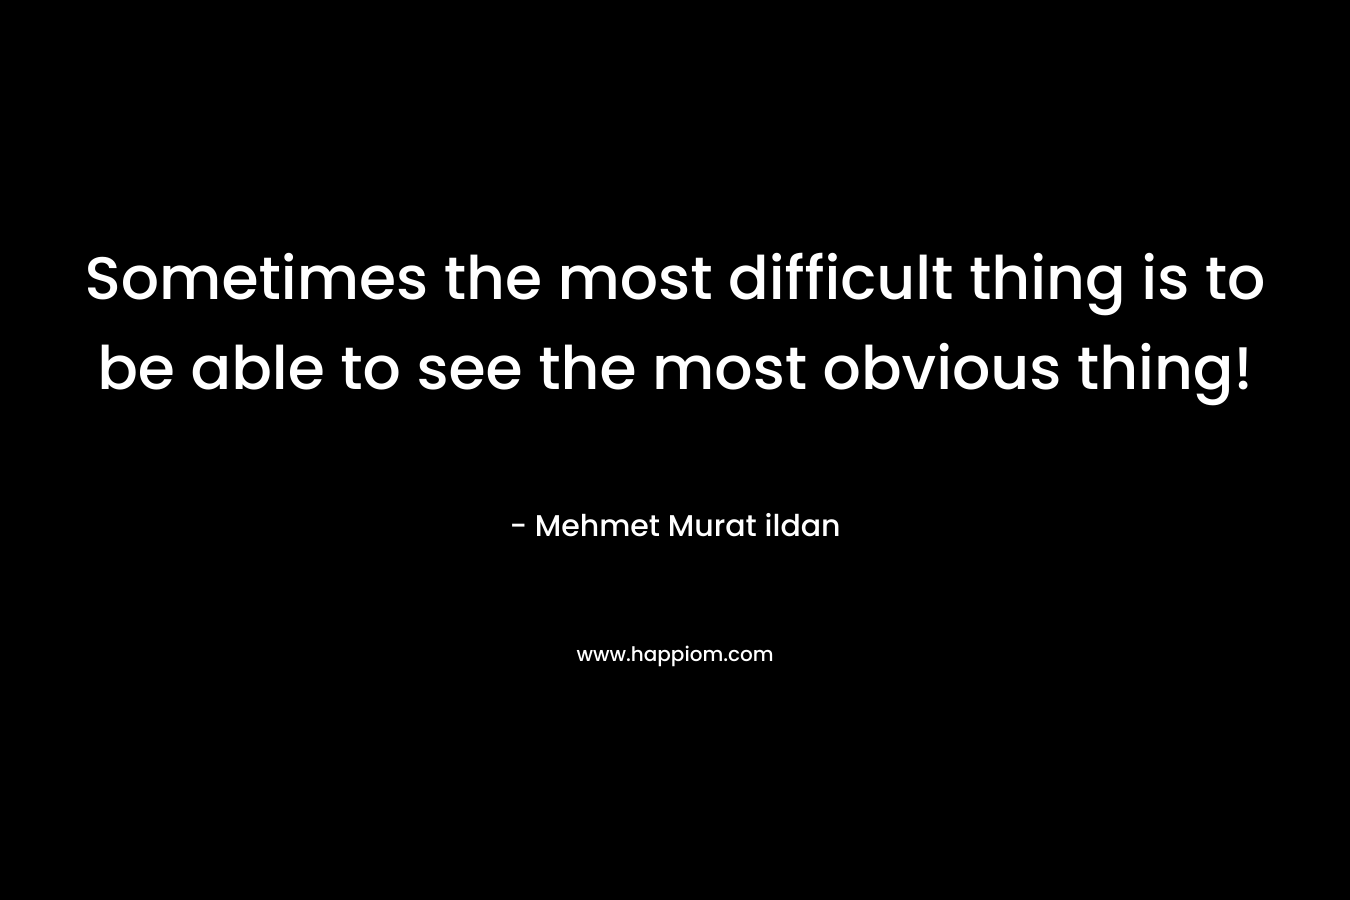 Sometimes the most difficult thing is to be able to see the most obvious thing!